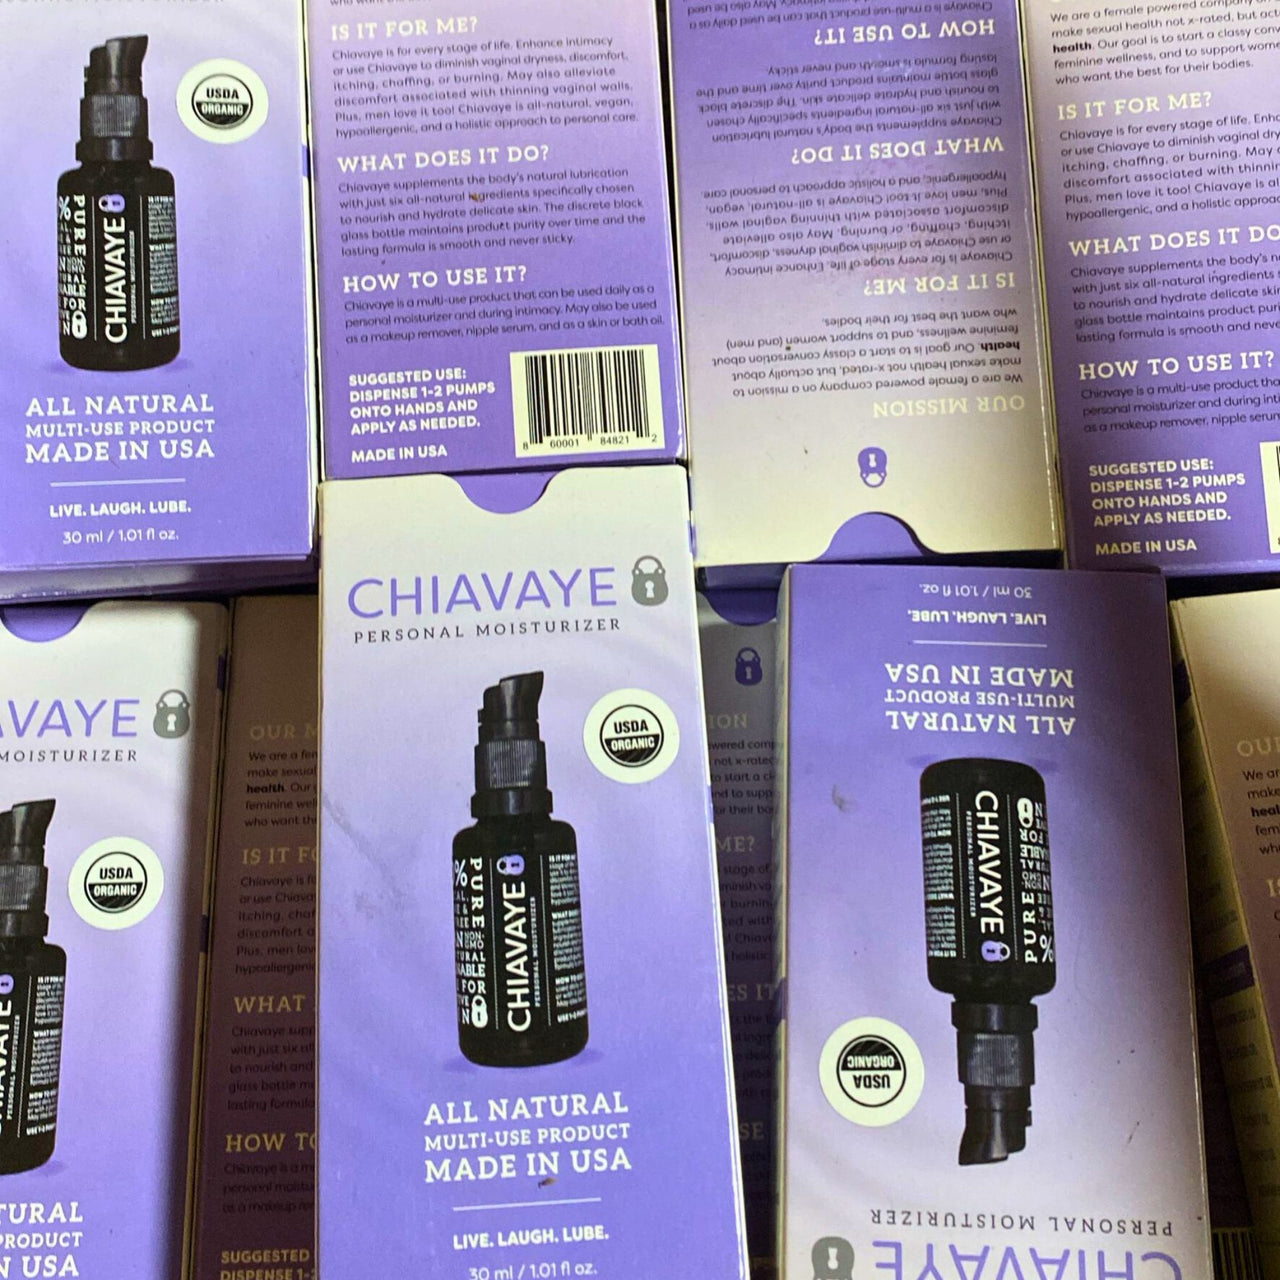 Chiavaye Personal Moisturizer All Natural Multi-Use Product Live.Laugh.Lube